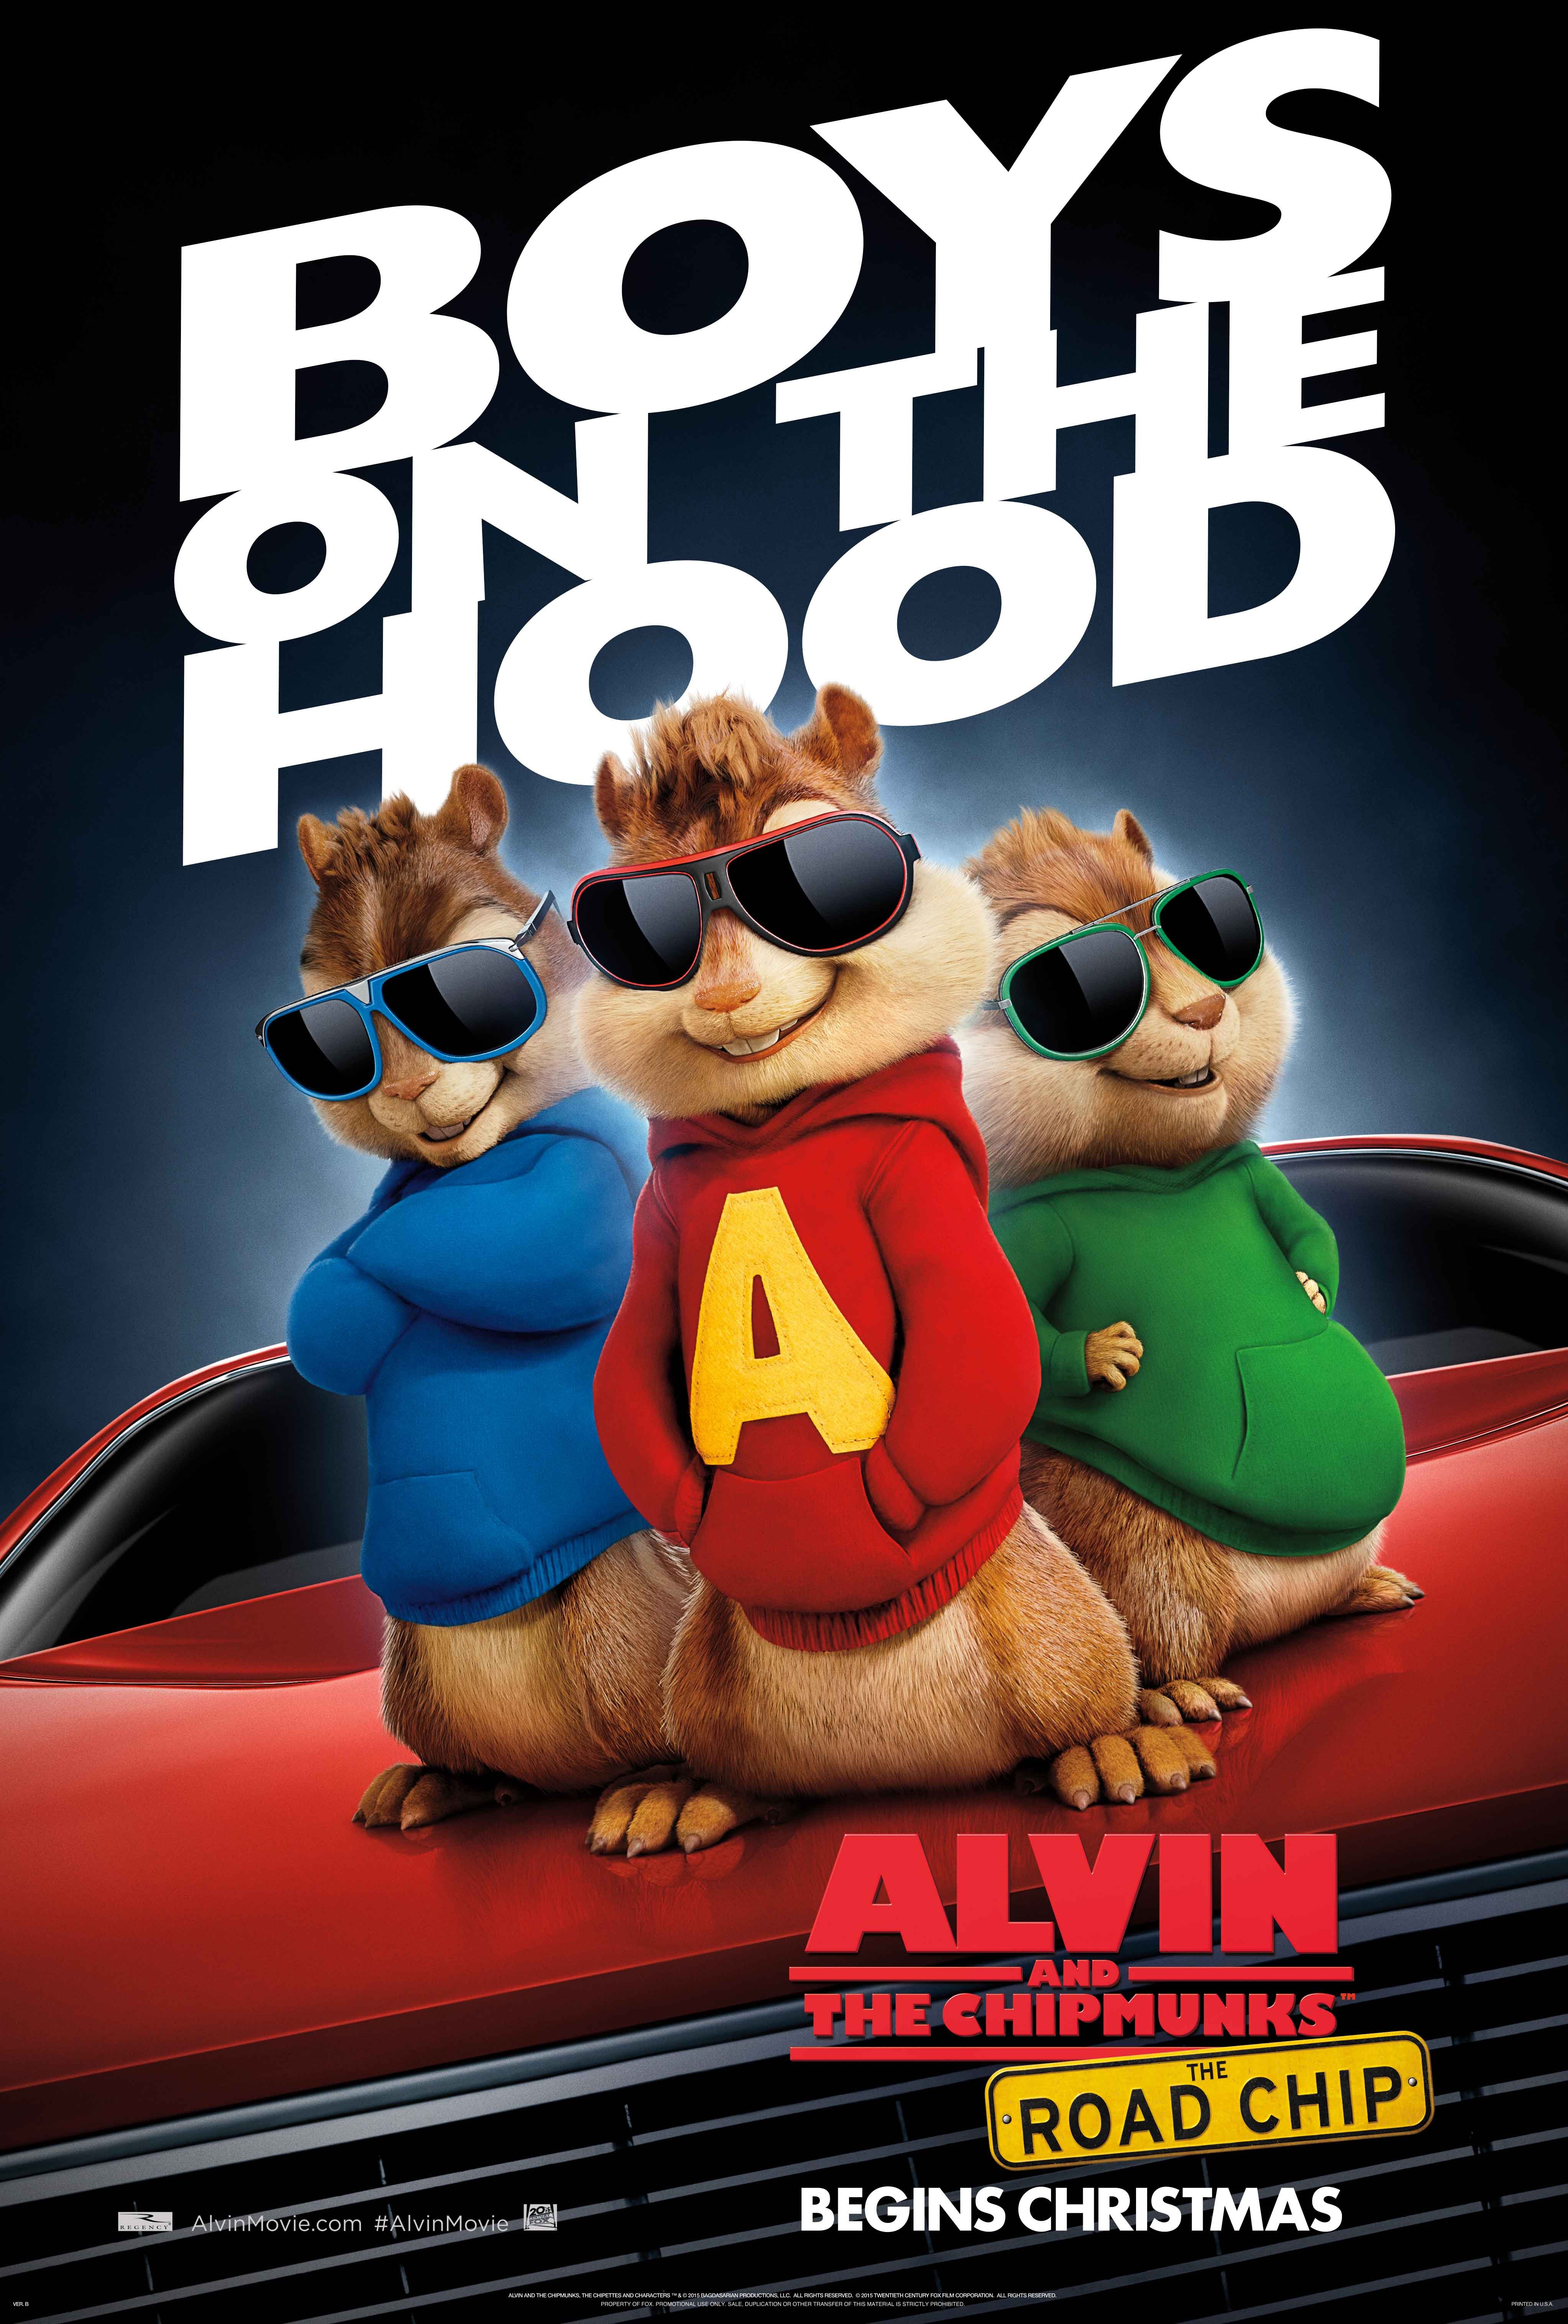 Poster of the movie Alvin and the Chipmunks: The Road Chip